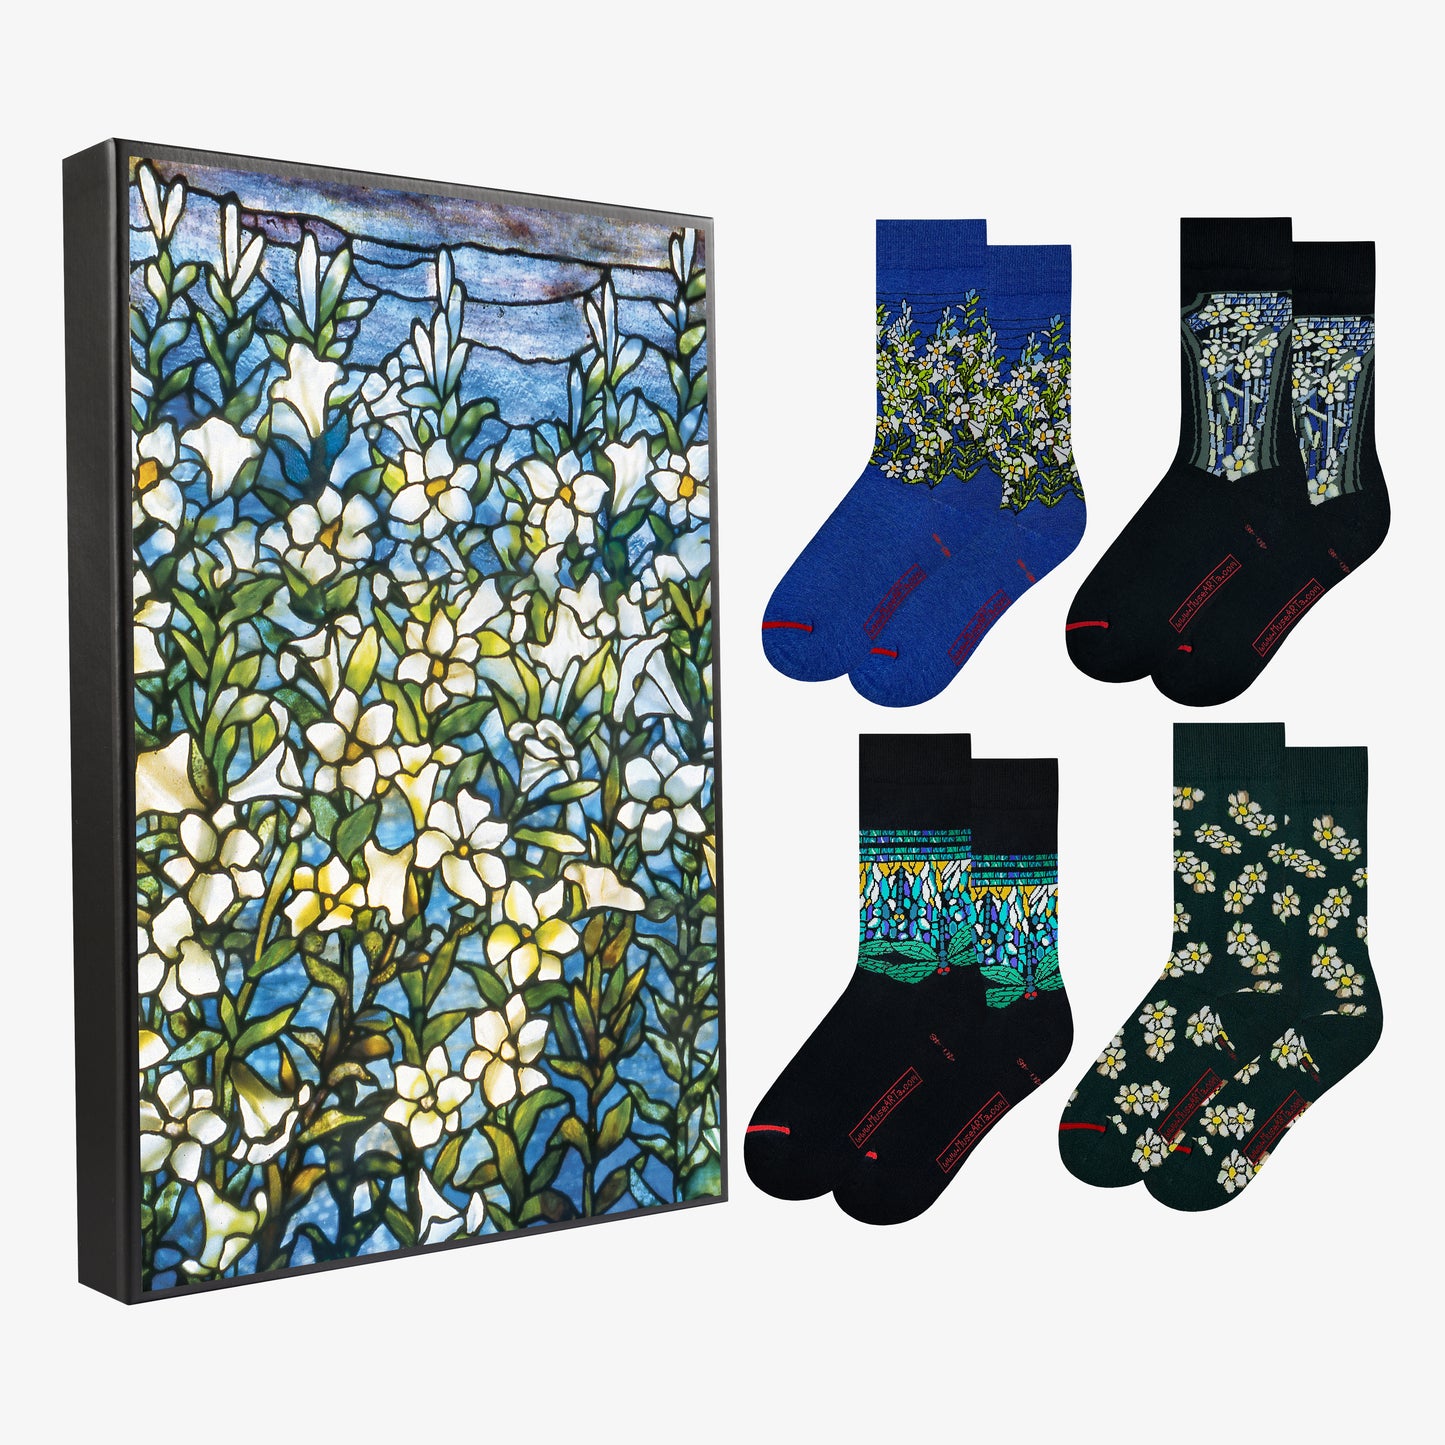 Louis Comfort Tiffany - Gift set with 4 pairs of socks